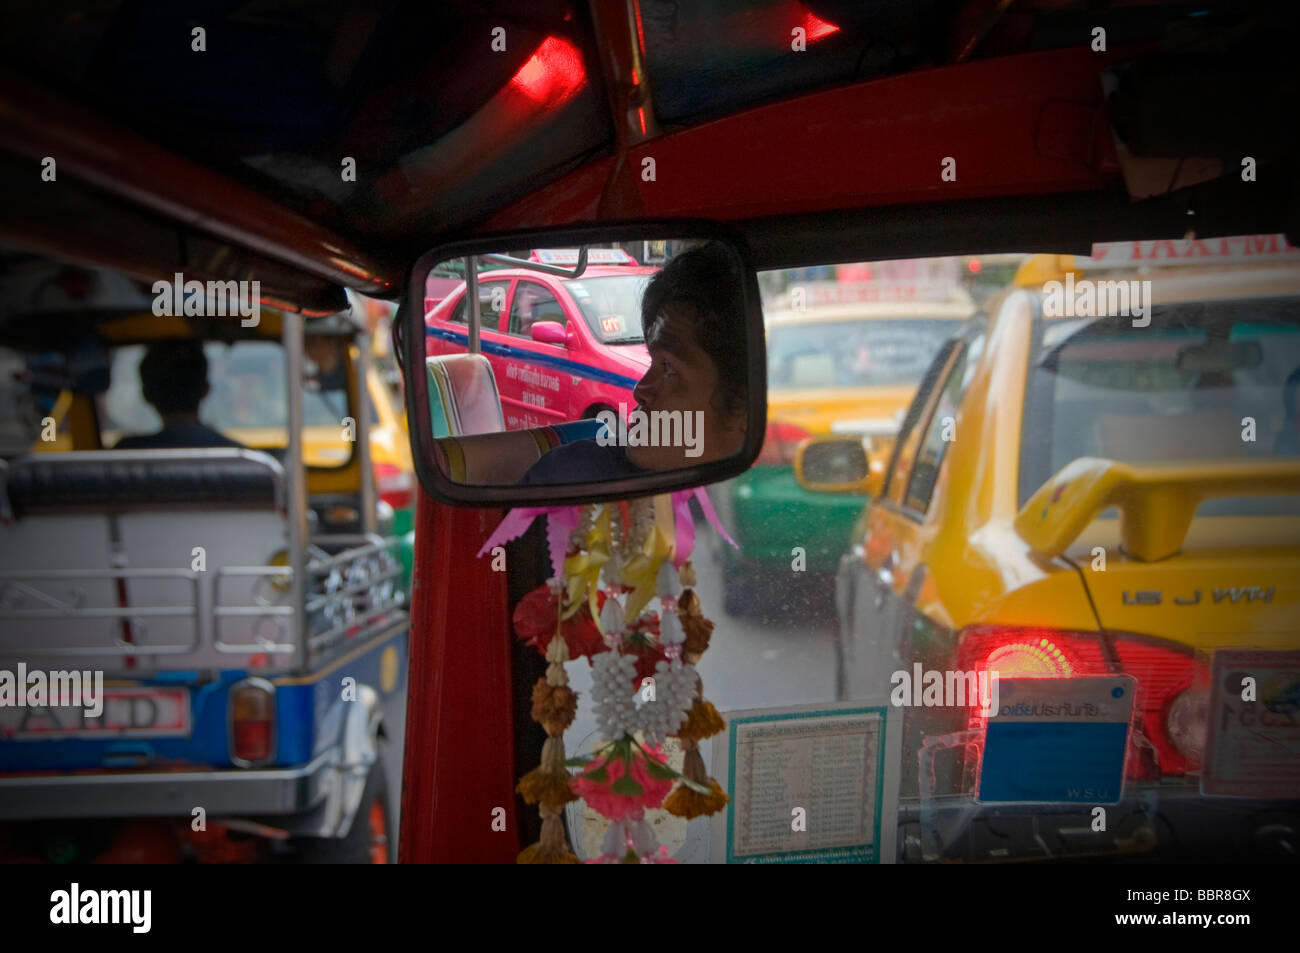 A driver is reflected in the rearview mirror of an Auto rickshaw taxi, commonly known as Tuk Tuk in Bangkok Thailand Stock Photo